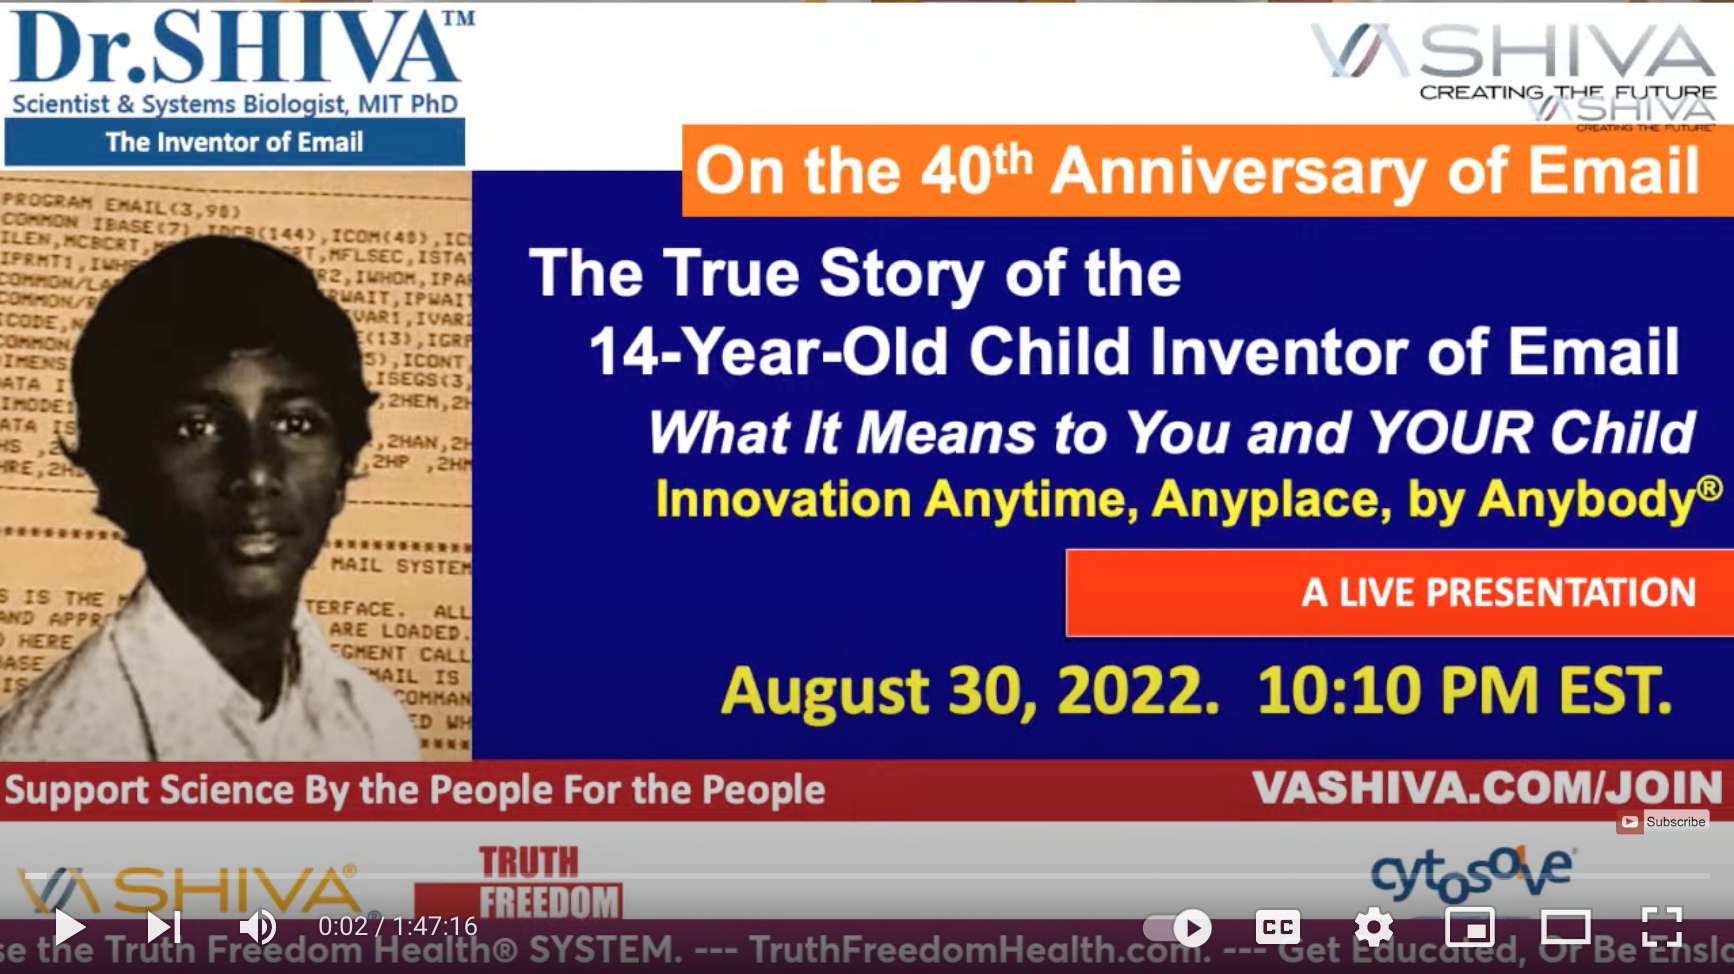 Dr.SHIVA LIVE: The True Story of the 14-year-old Inventor of Email. What It Means to You & YOUR Child. On the Occasion of the 40th Anniversary of Email.